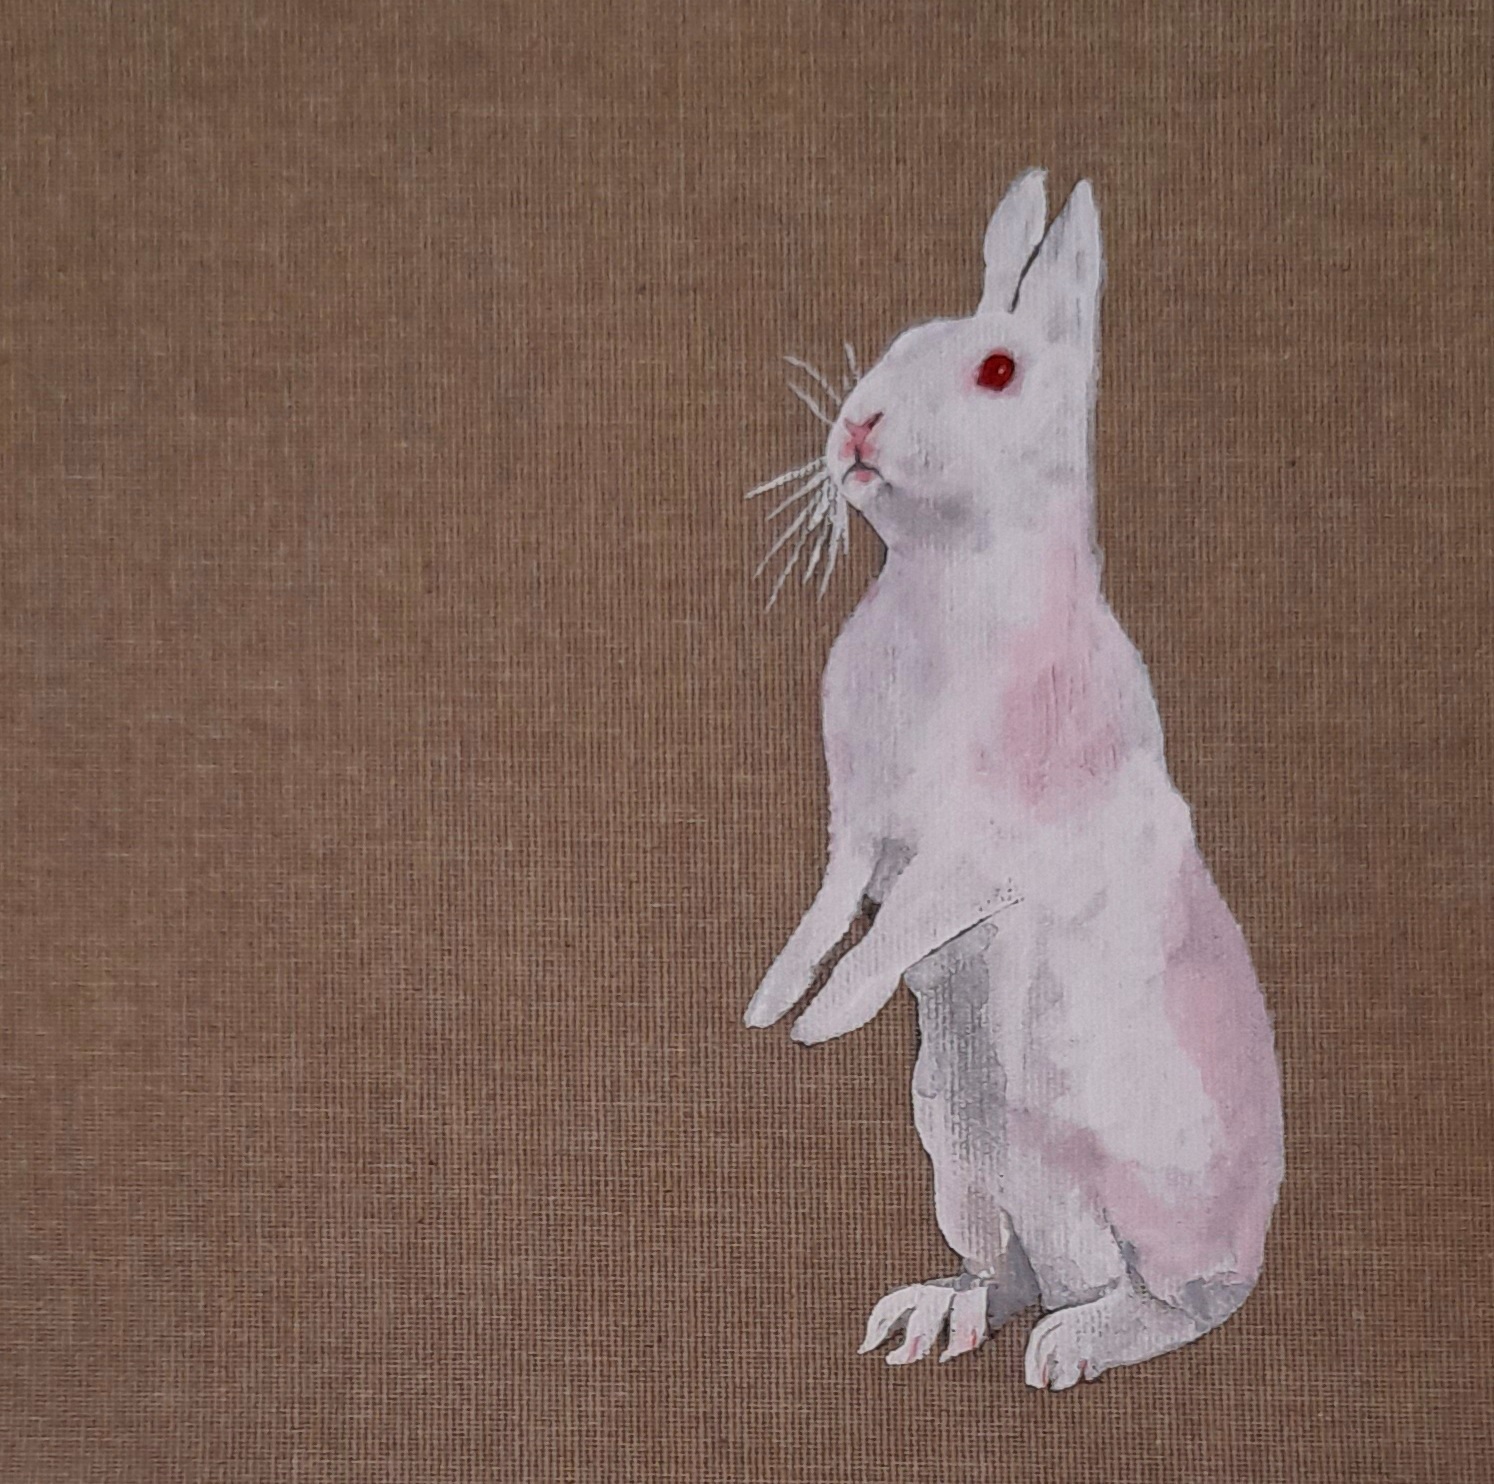 A white bunny rabbit stands on its hind legs on the right half of a brown canvas.